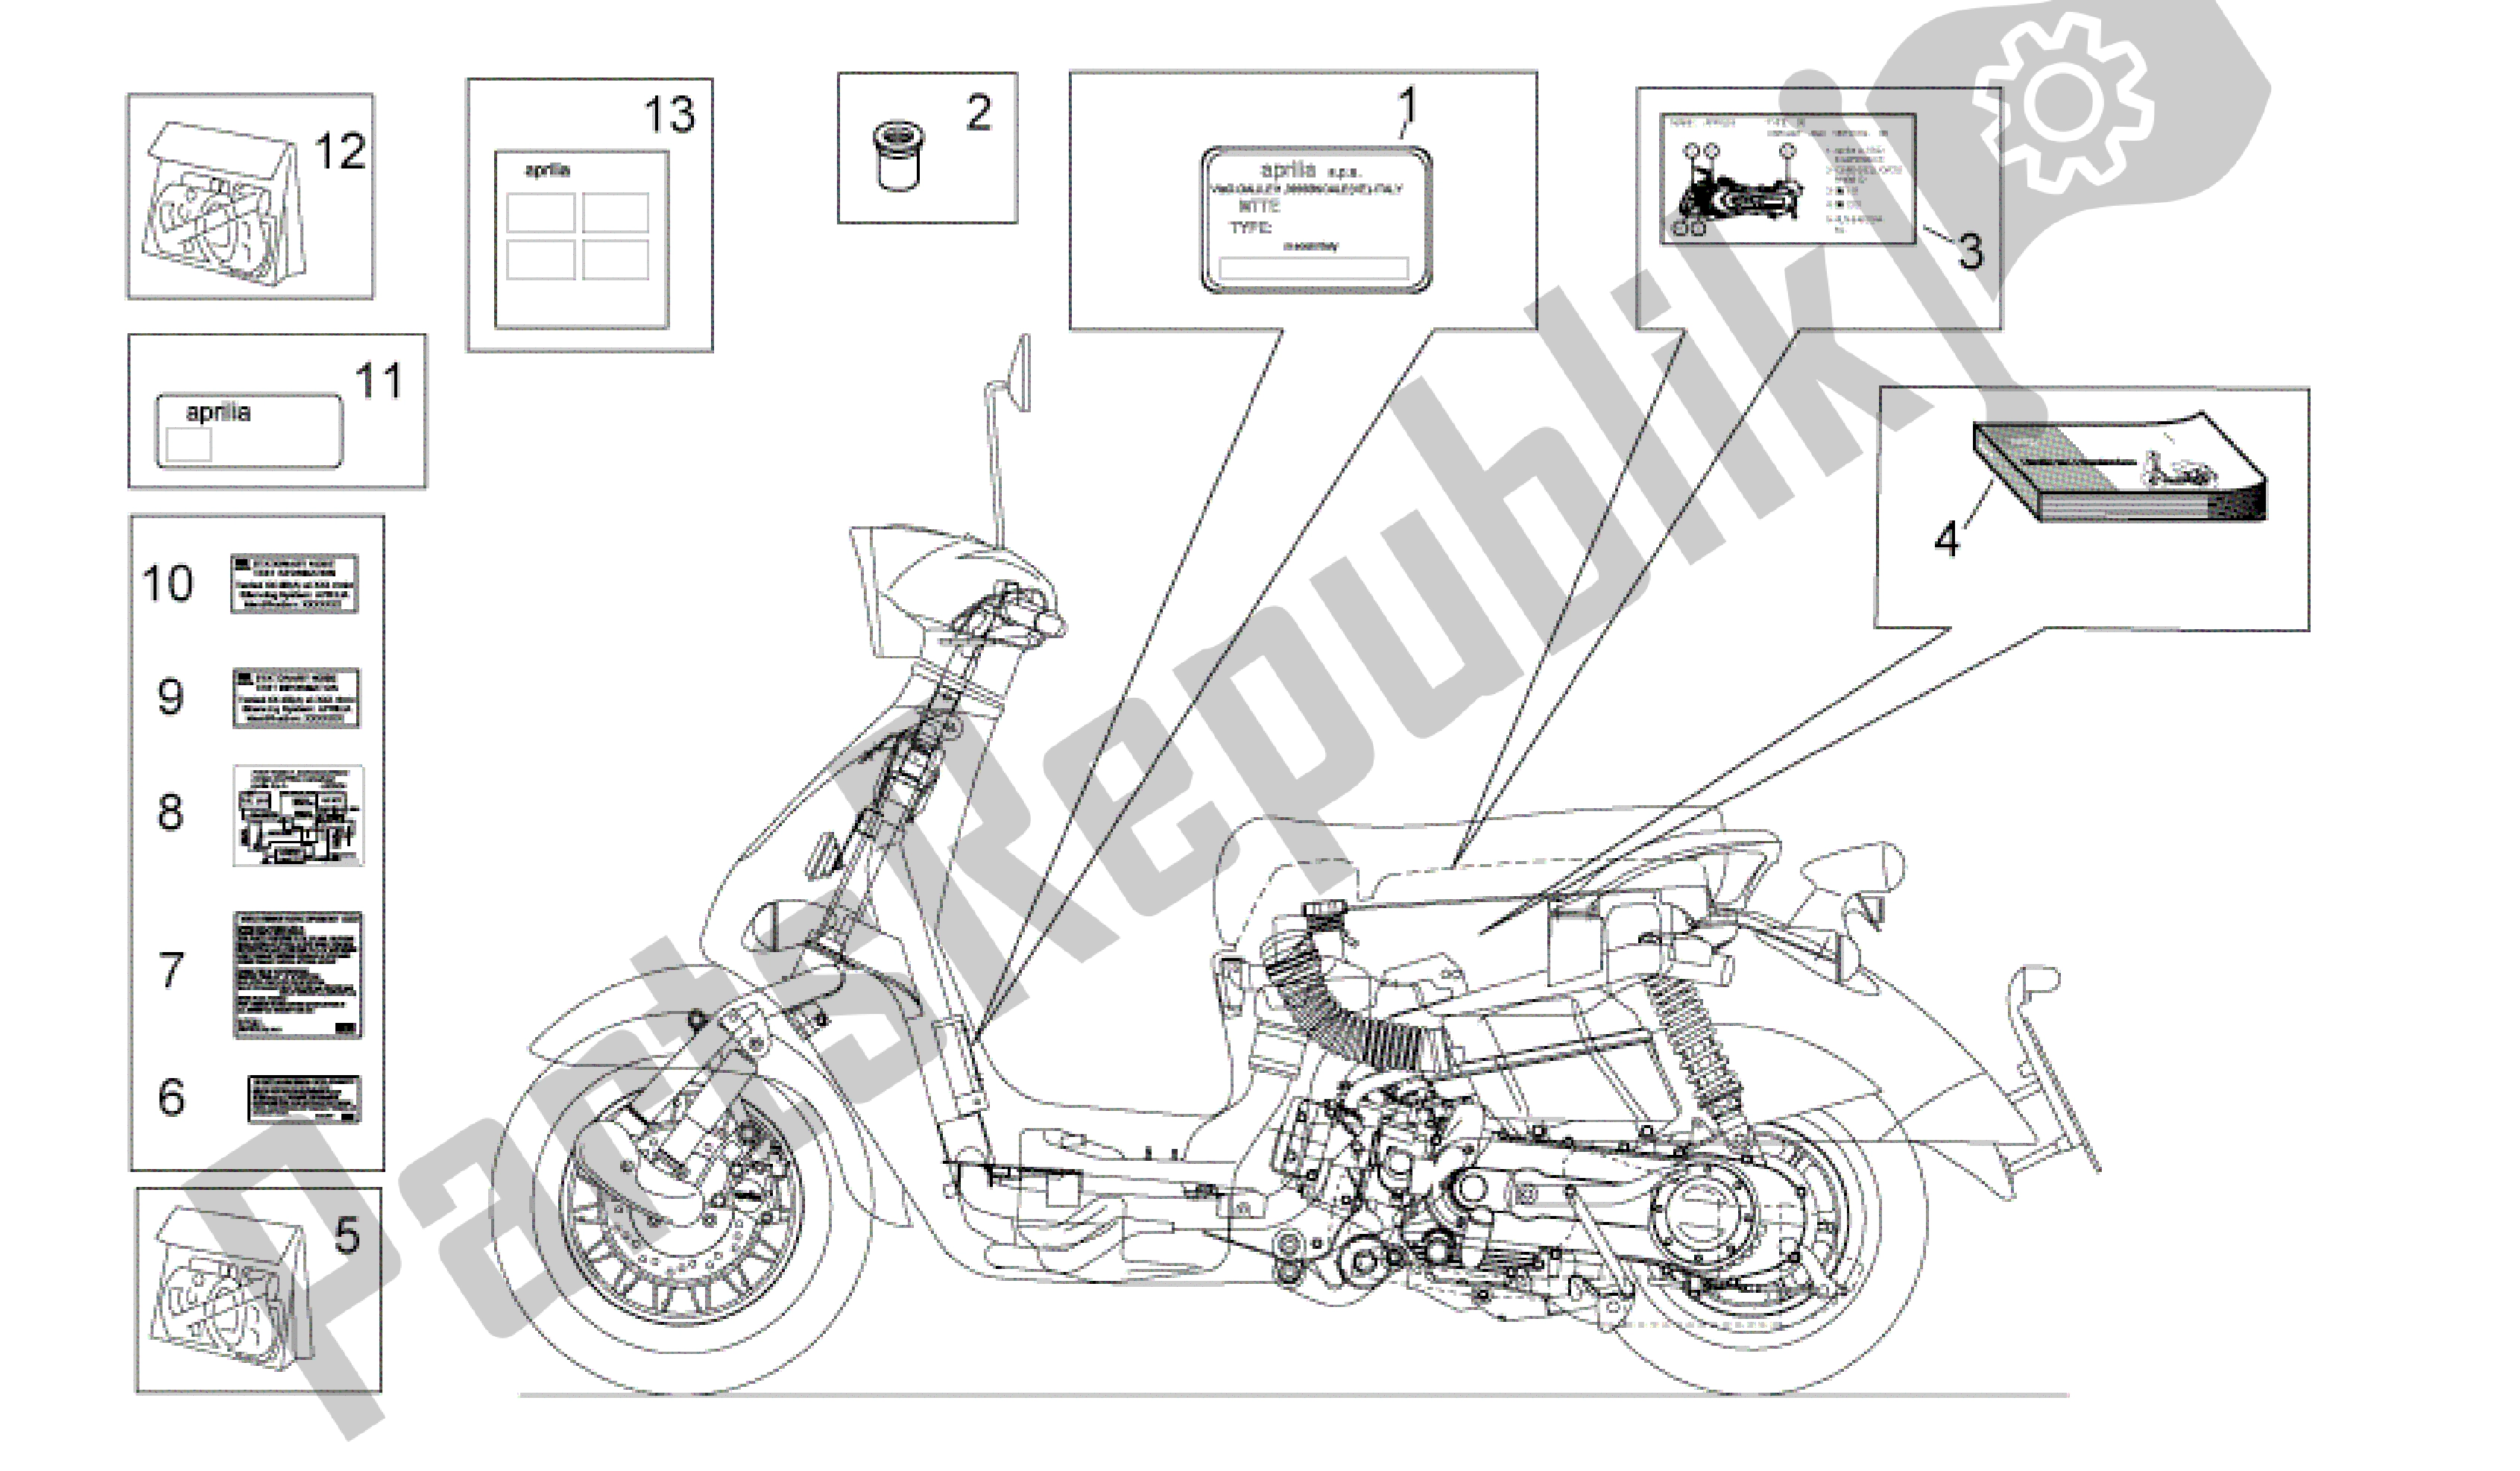 All parts for the Plate Set-decal-op. Handbooks of the Aprilia Mojito 125 2003 - 2007